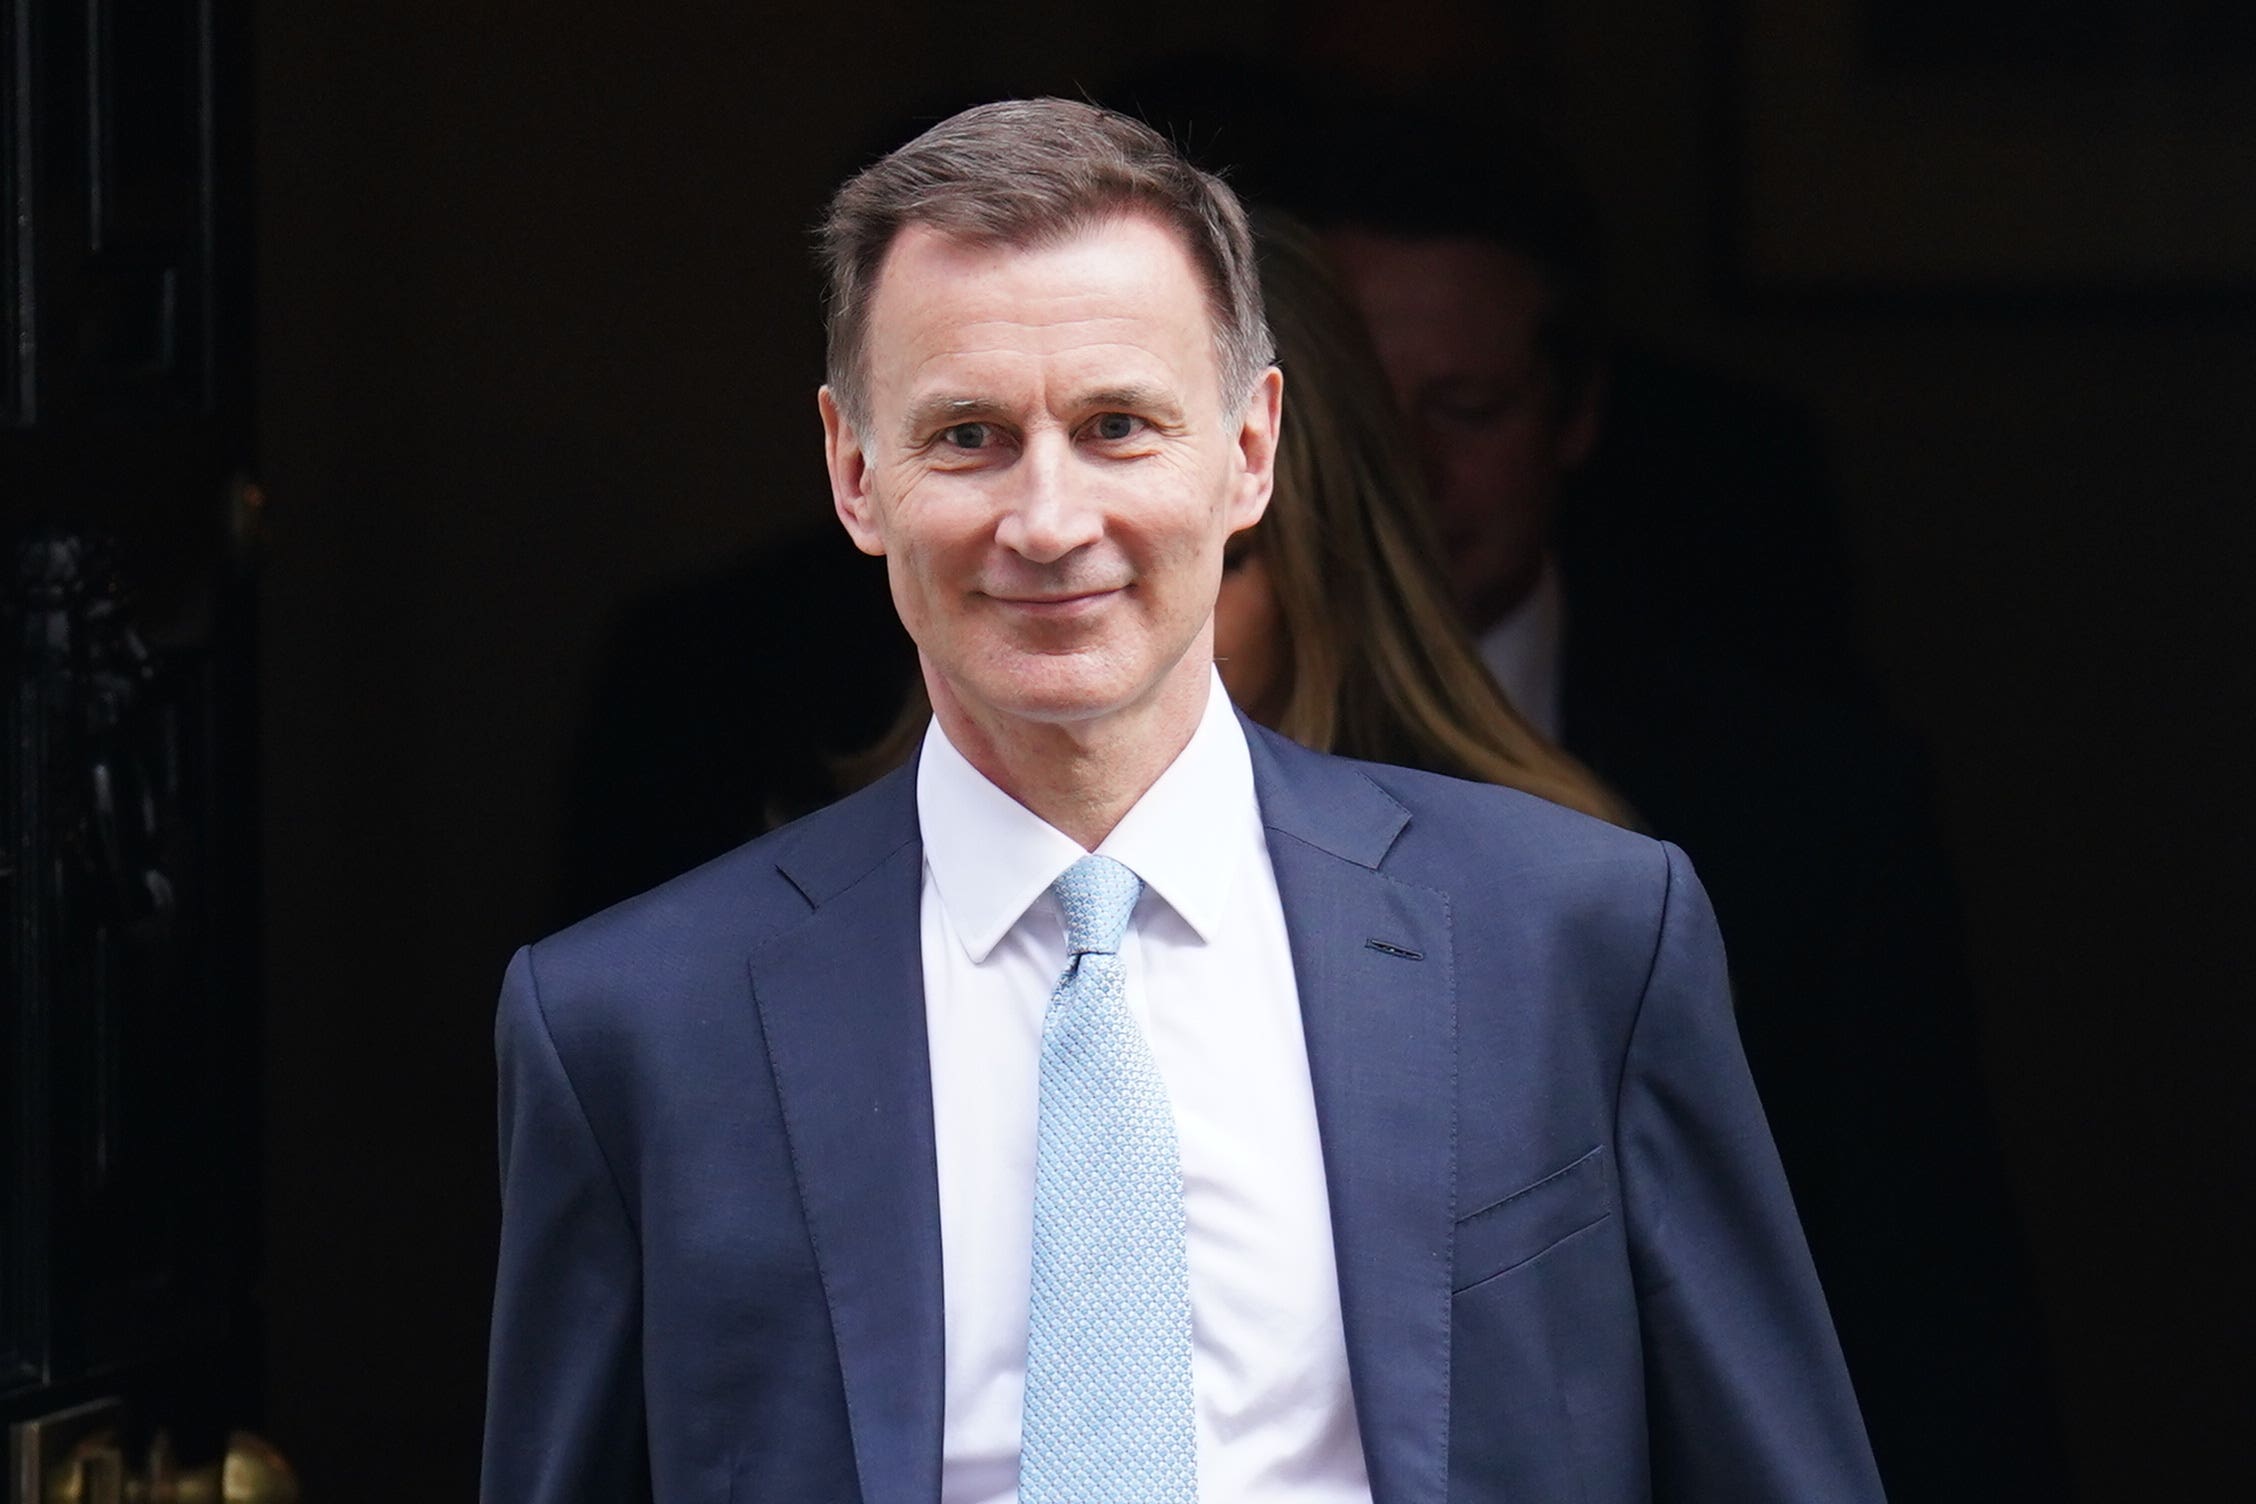 Chancellor of the Exchequer Jeremy Hunt is set to lose his seat under a new prediction by polling company YouGov